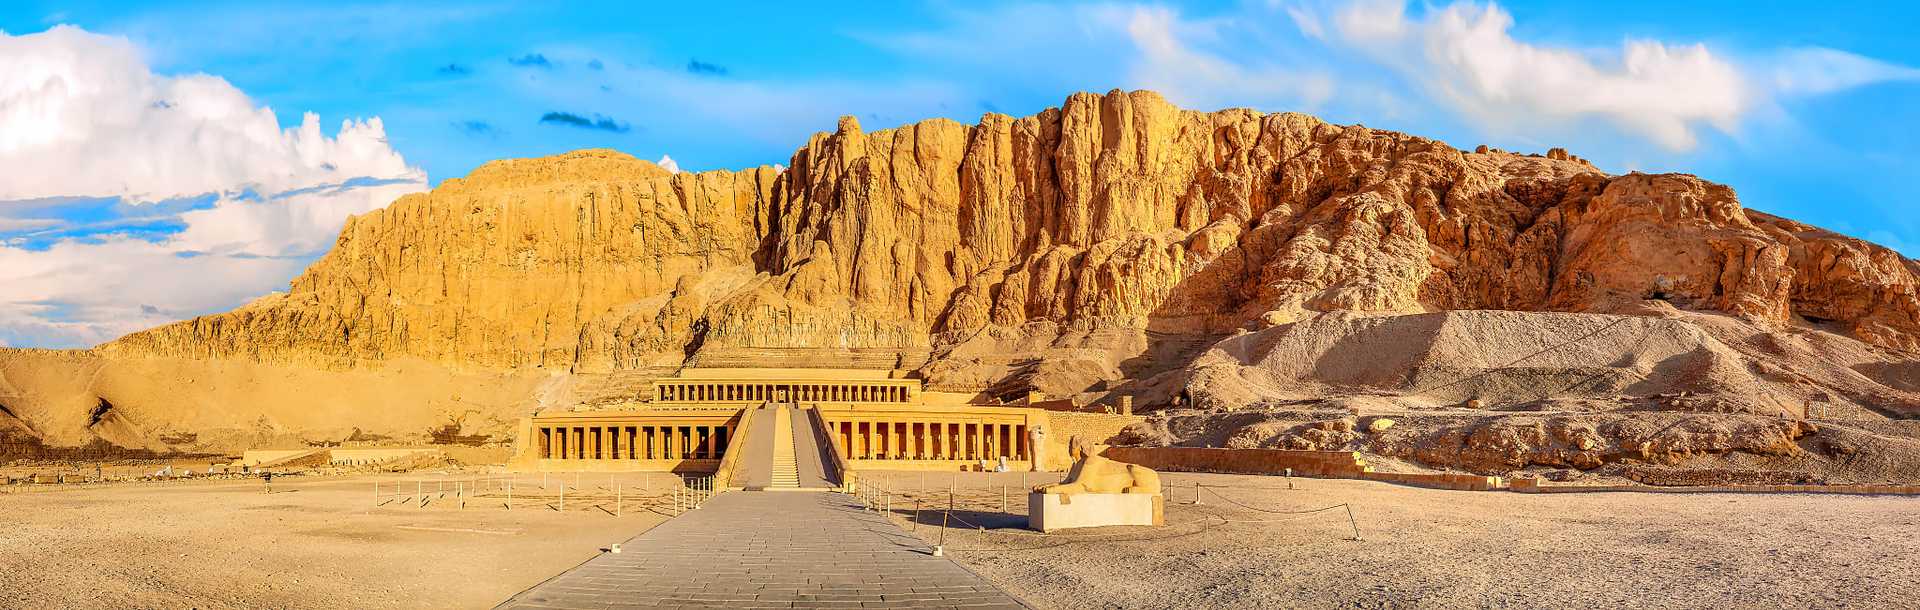 Mortuary Temple of Hatshepsut beneath the cliffs at Deir el-Bahari on the west bank of the Nile near the Valley of the Kings in Egypt.